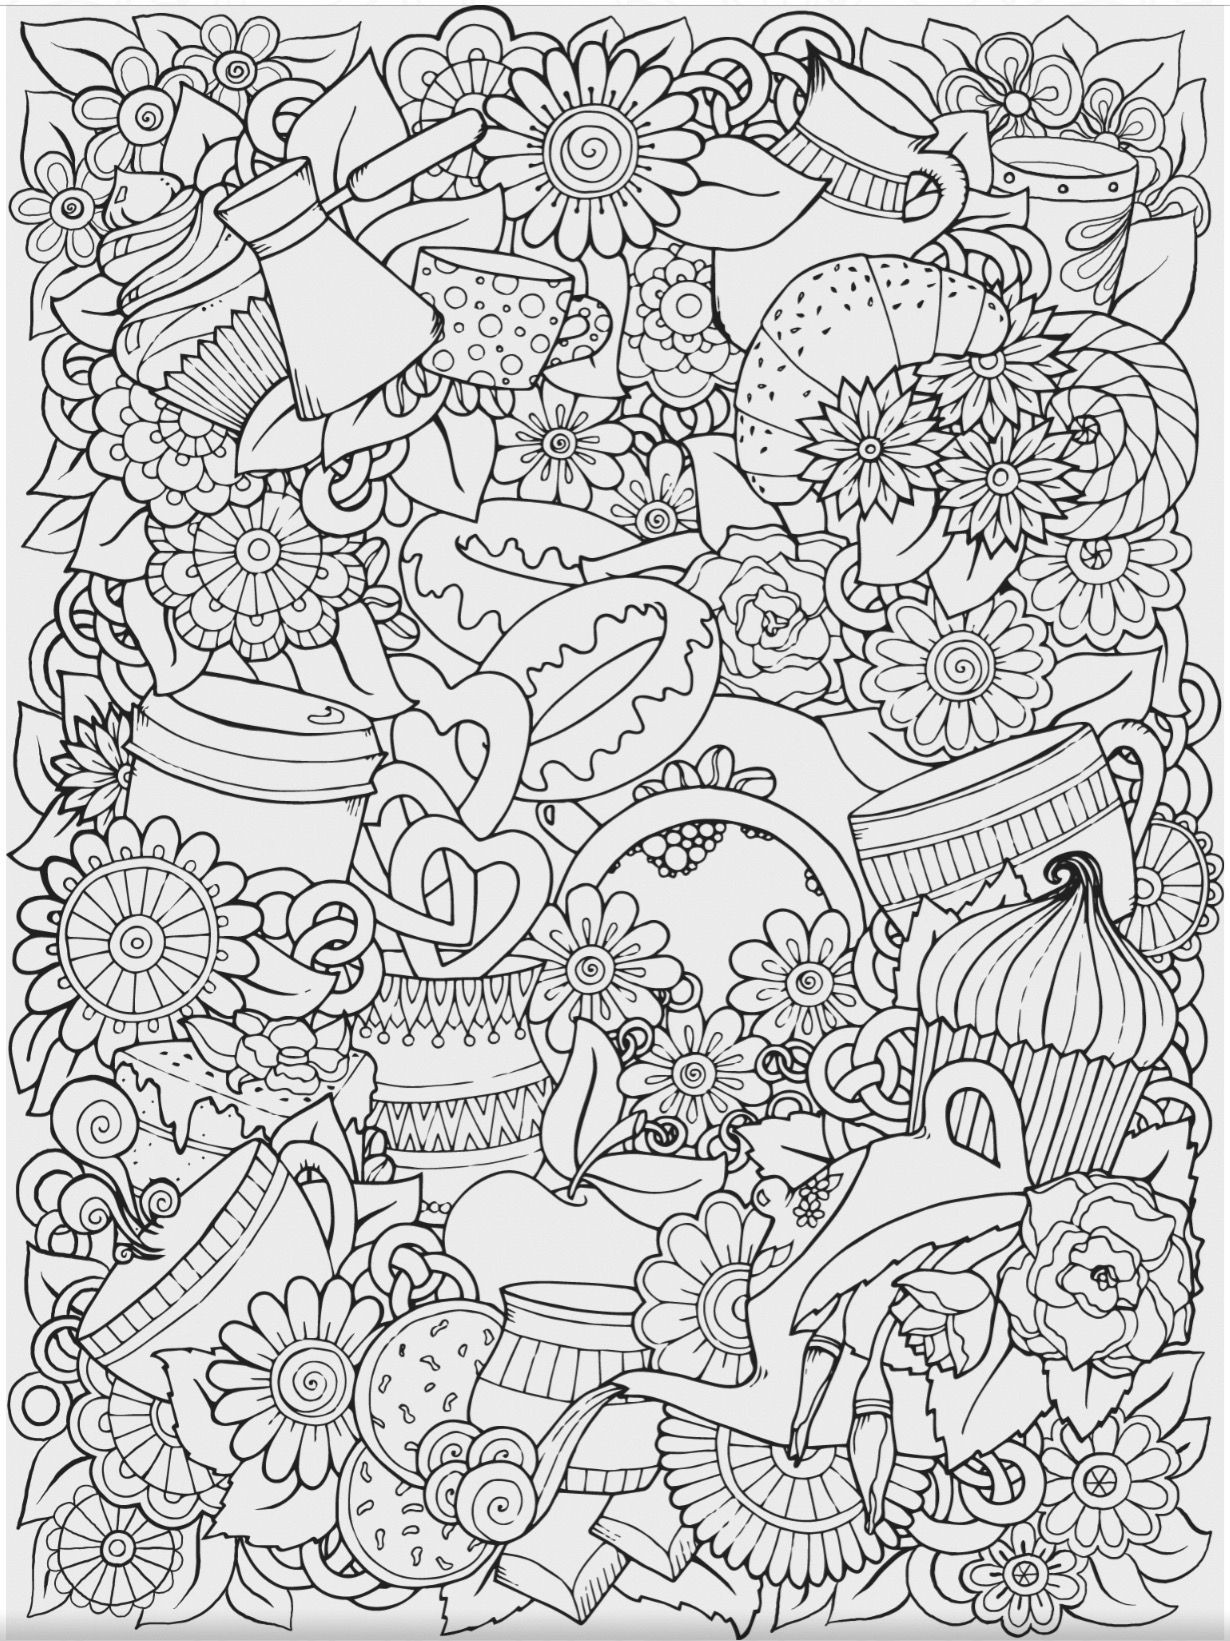 Adult Food Coloring Pages
 Pin by Carol Ratliff on Coloring X5